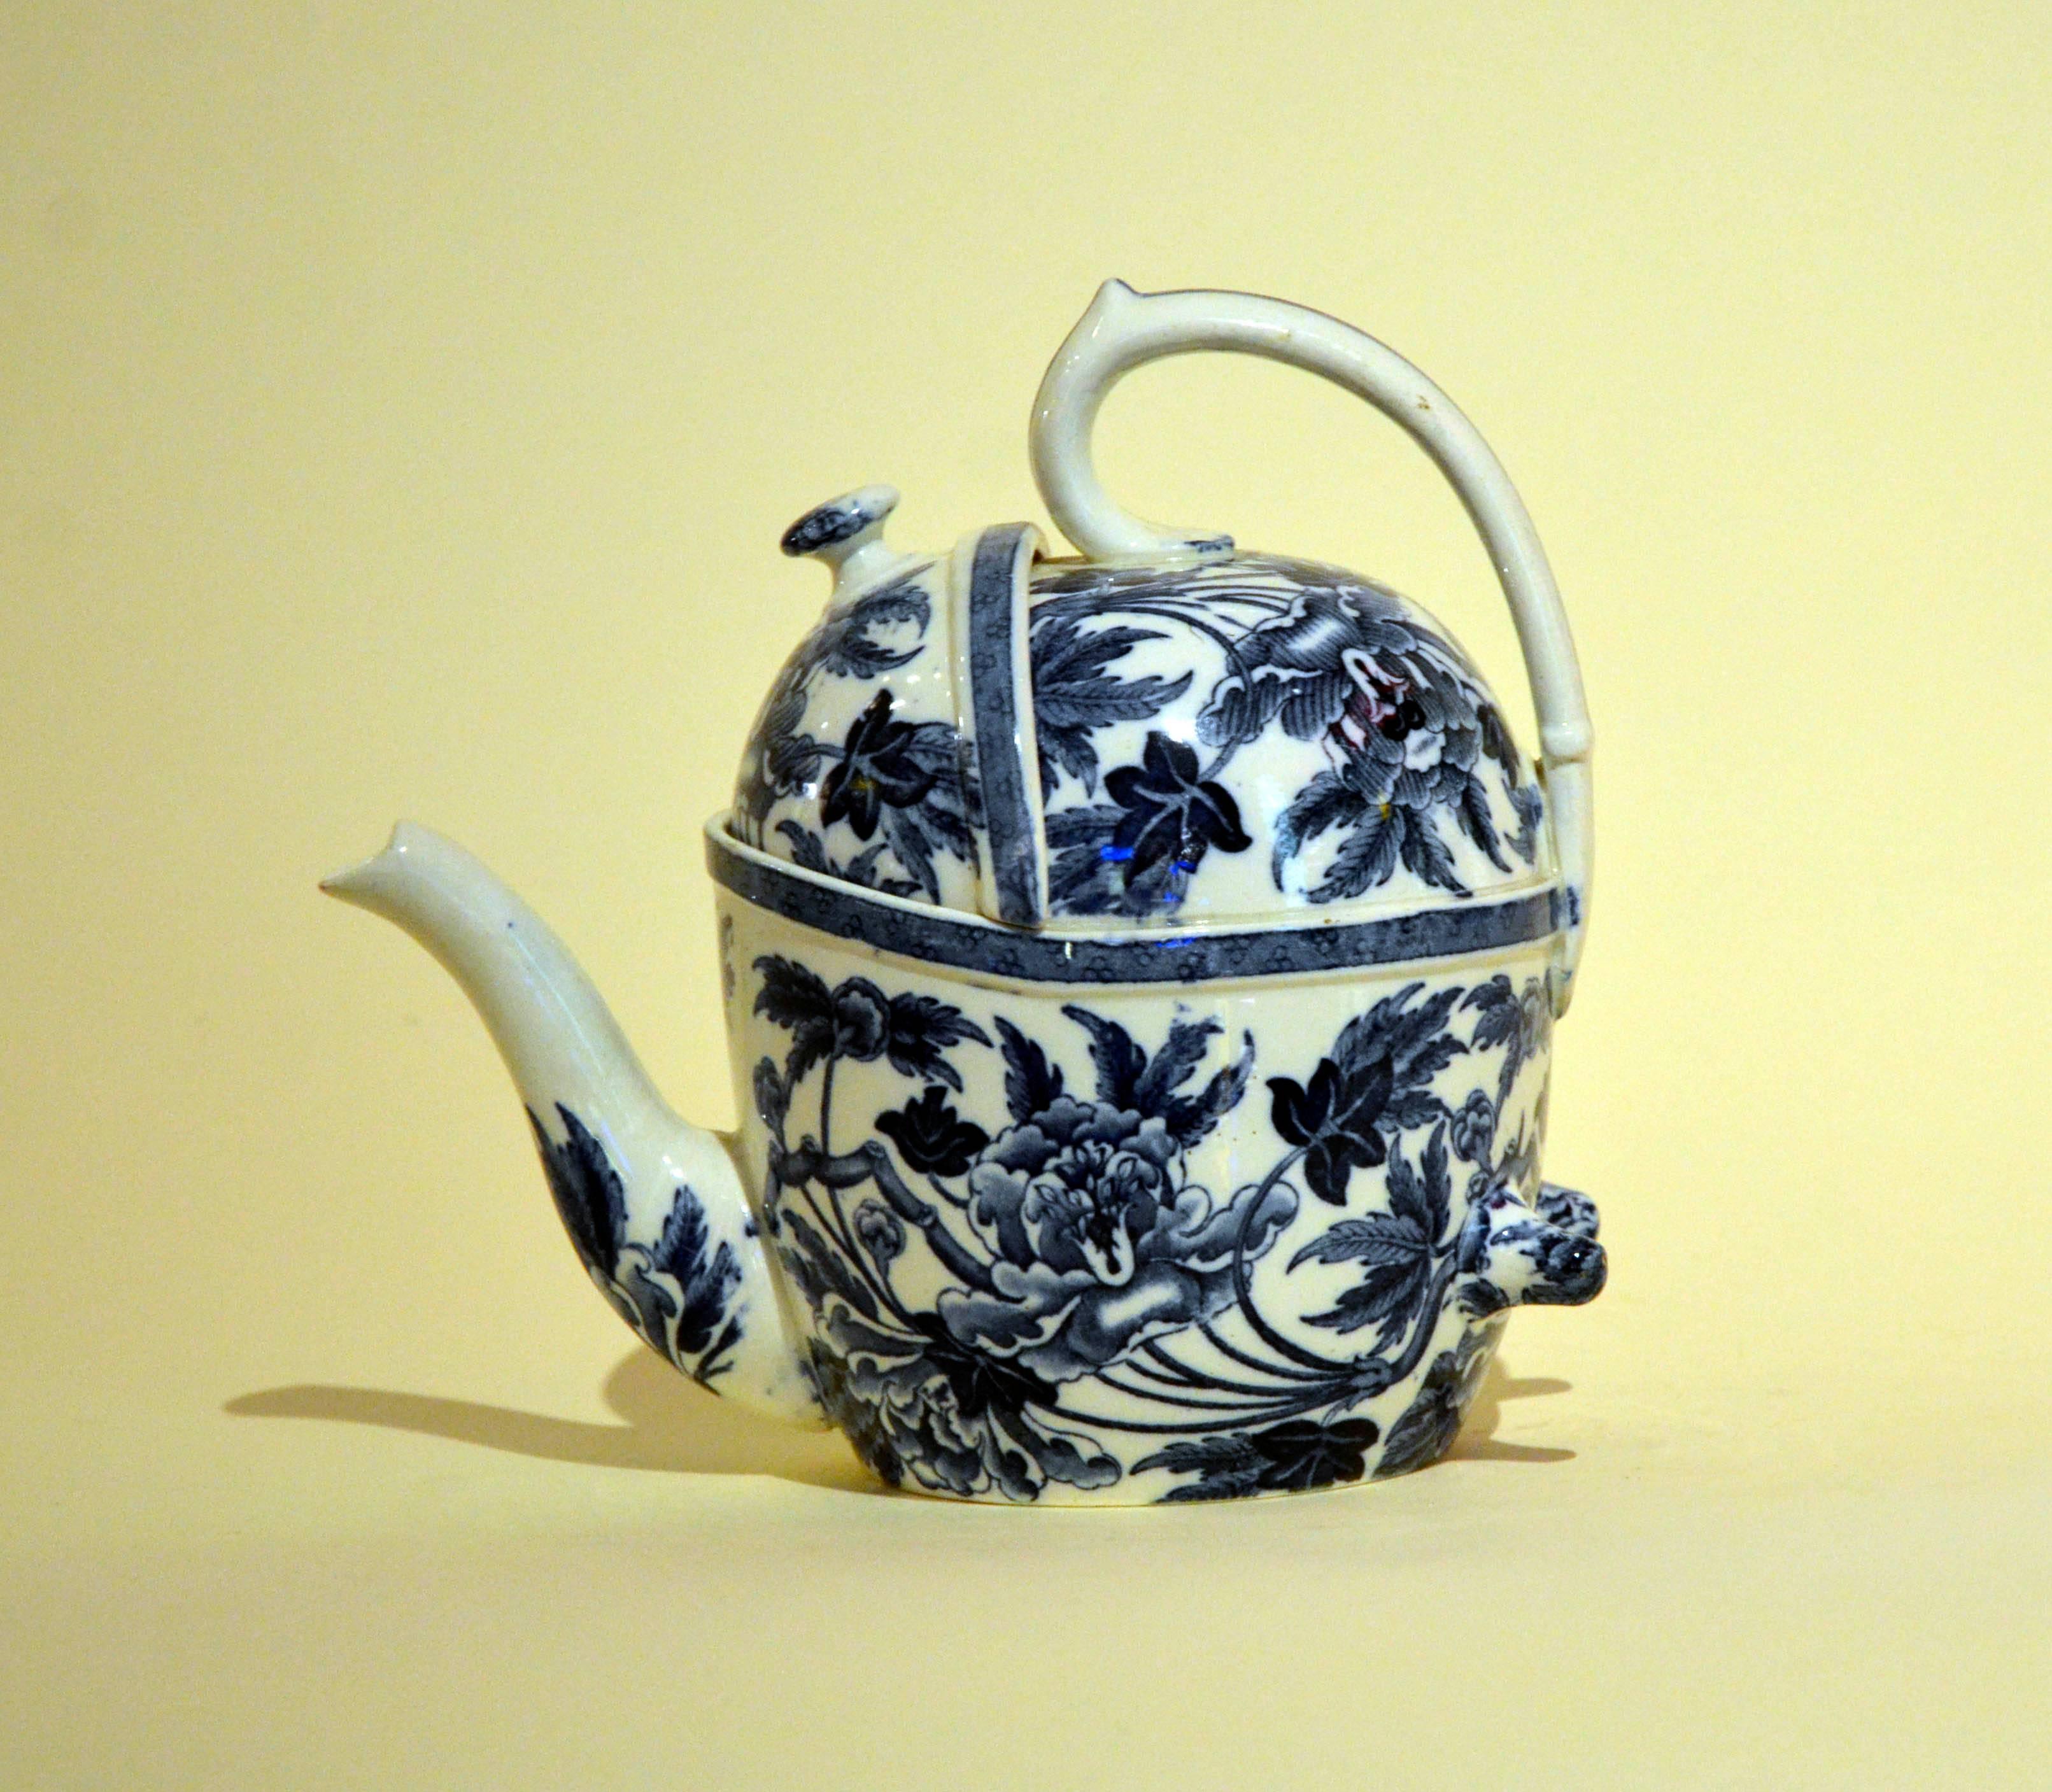 Edwardian 1900s S.Y.P. Simple Yet Perfect Peony Wedgwood Patent Teapot Made in England